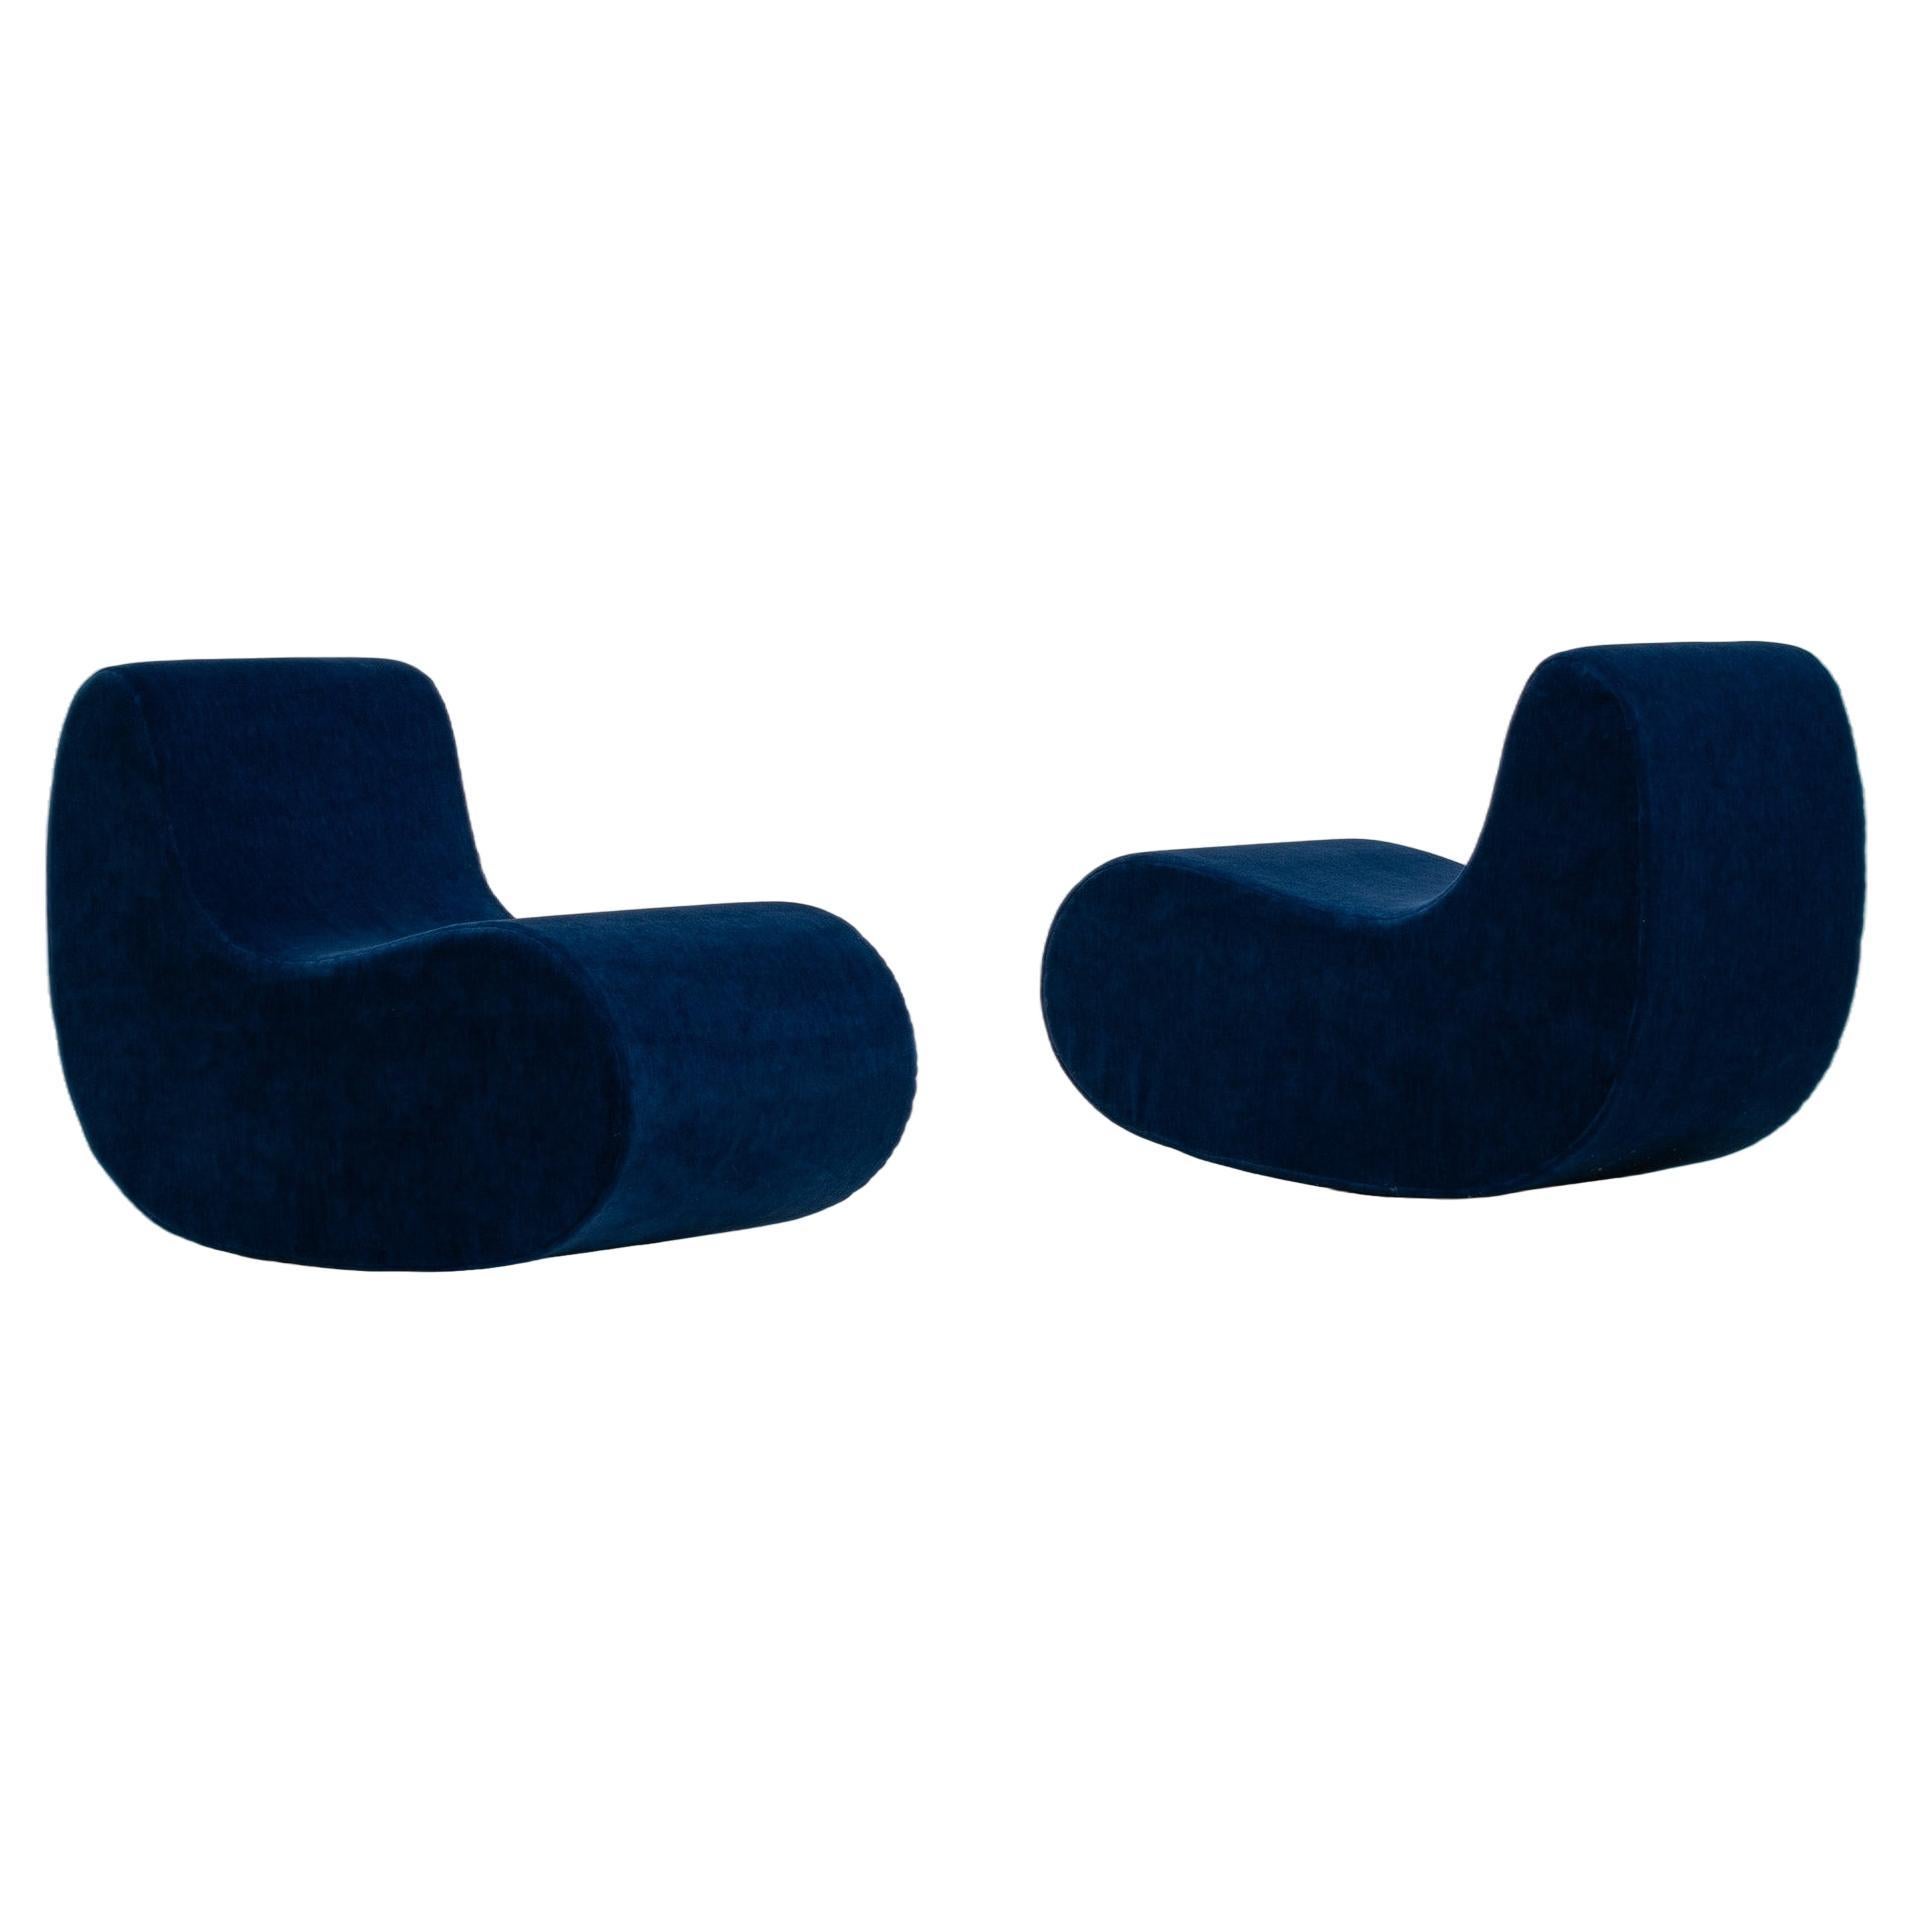 Pair of 'Sutra' Lounge Chairs by Gregorio Spini for Kundalini, Italy For Sale